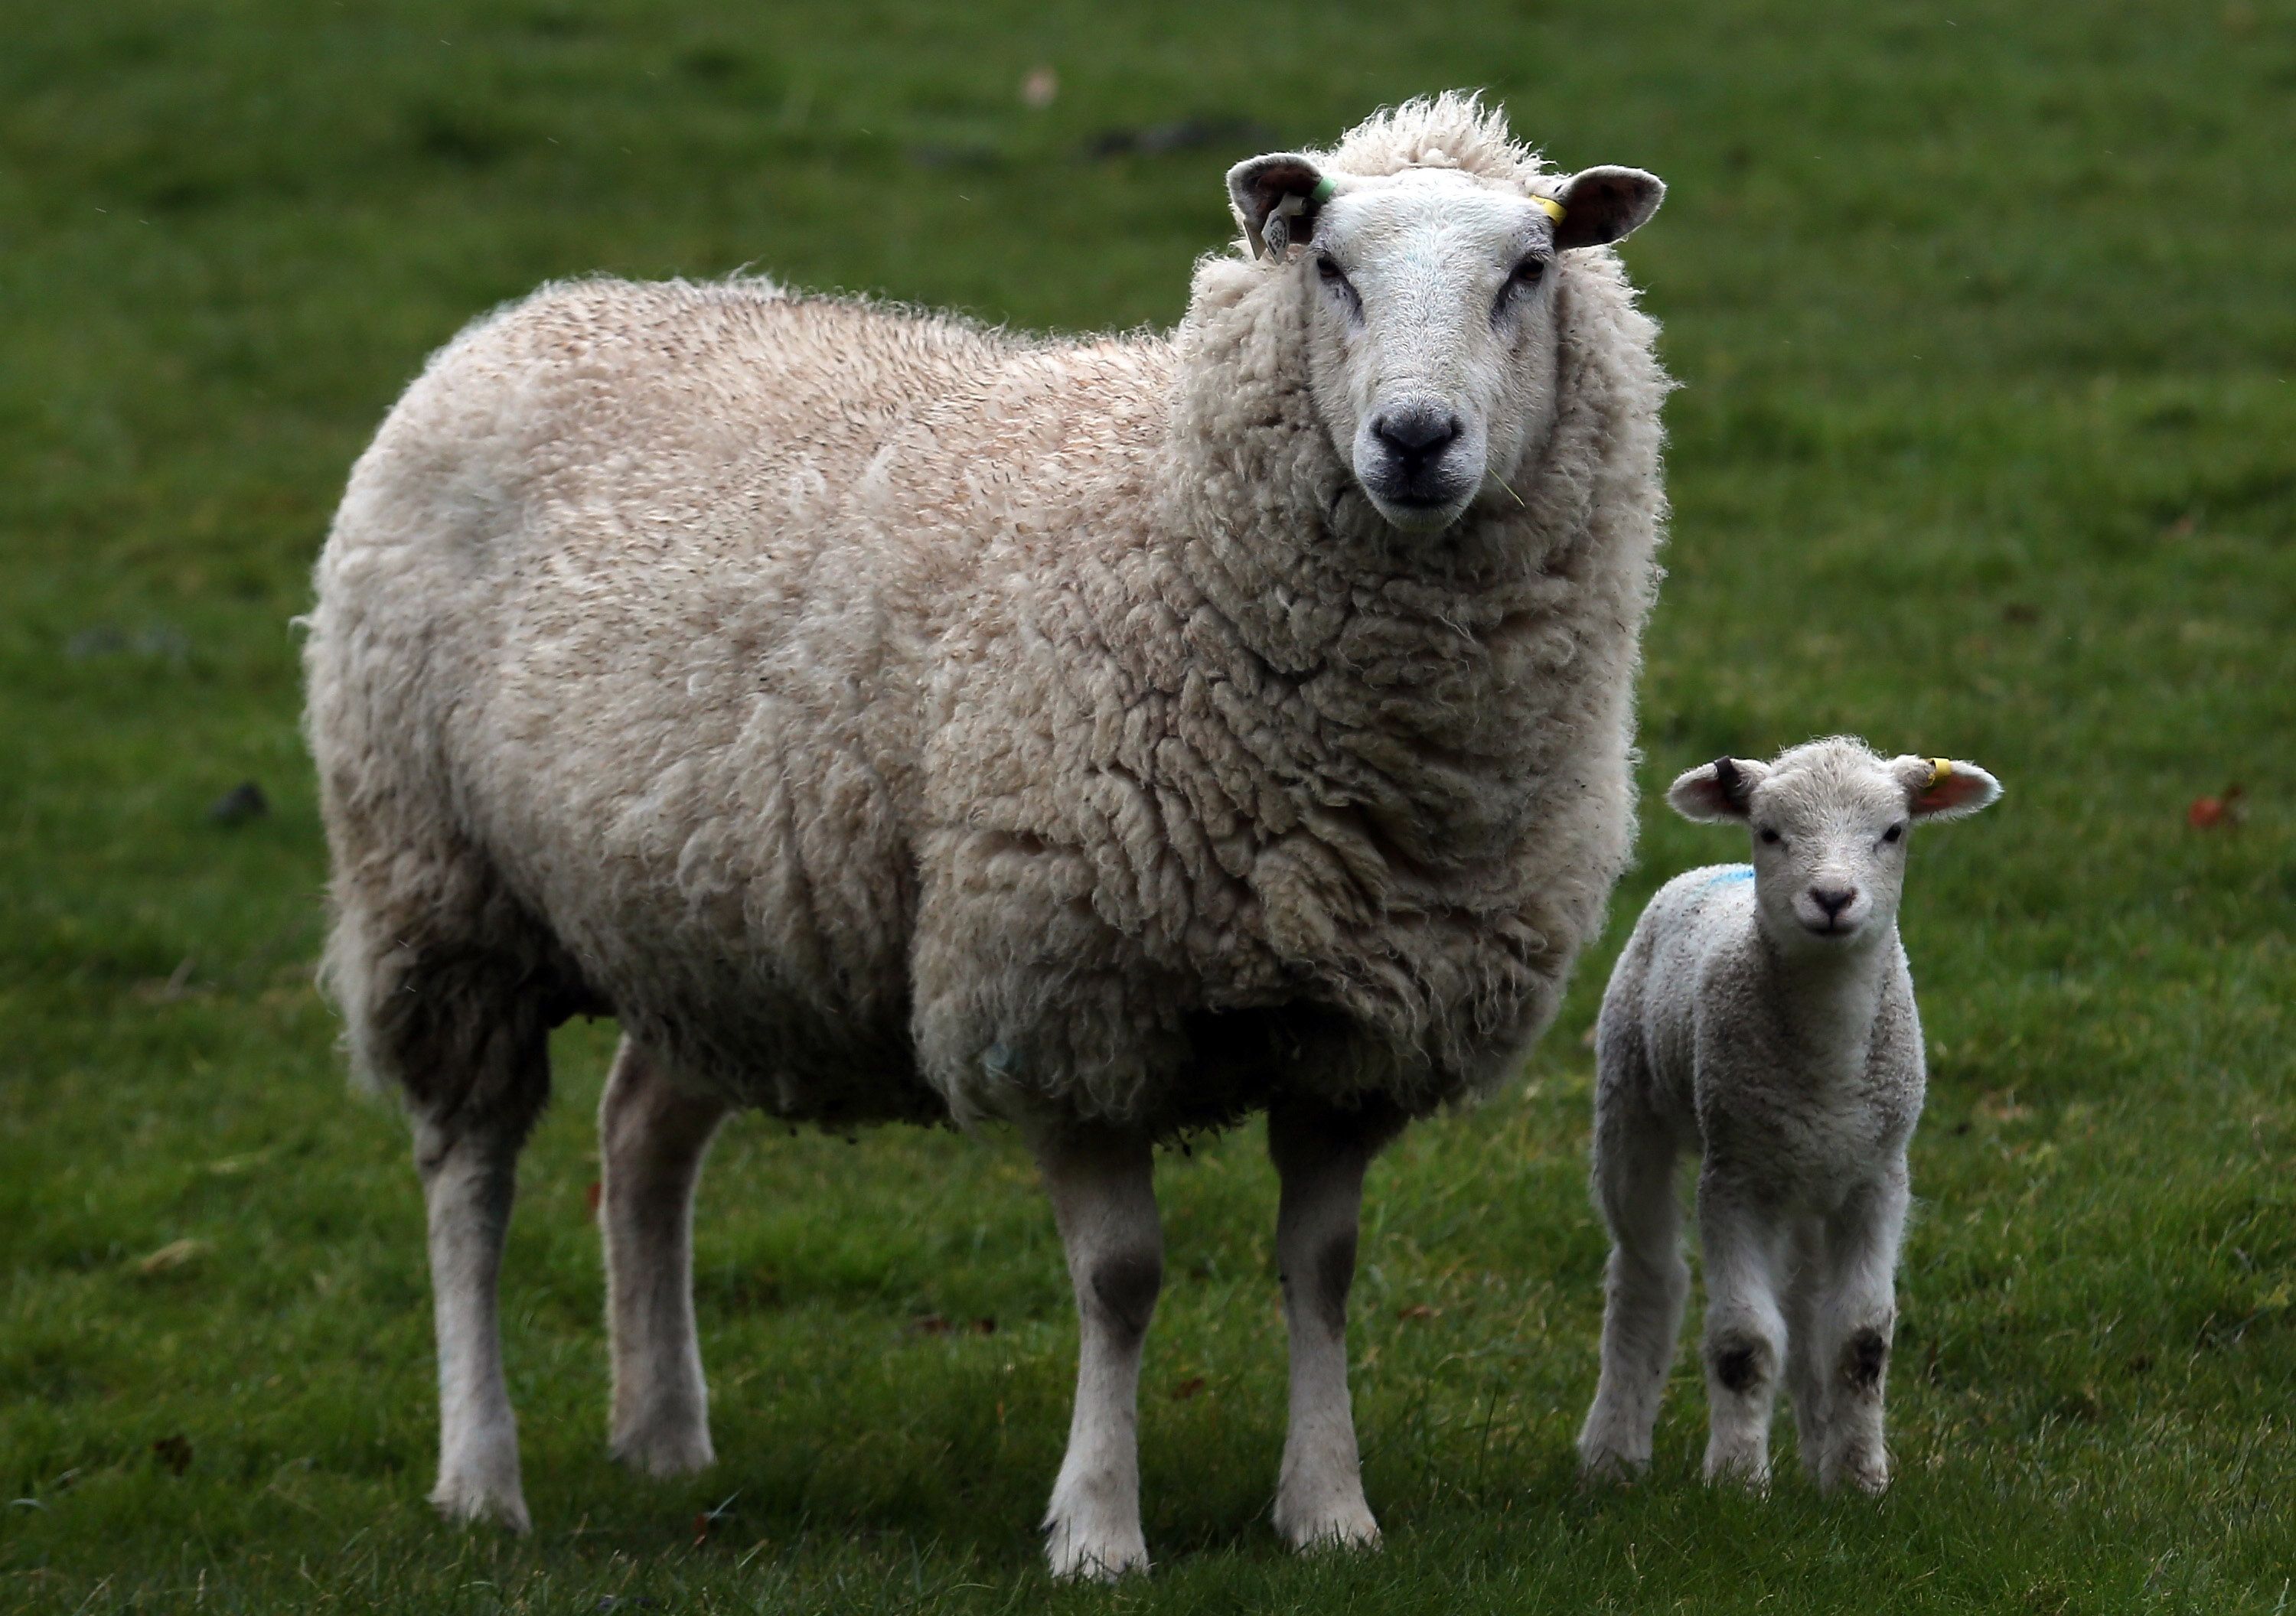 Baby Sheep and its Mother at Pasture # 3000x2112. All For Desktop